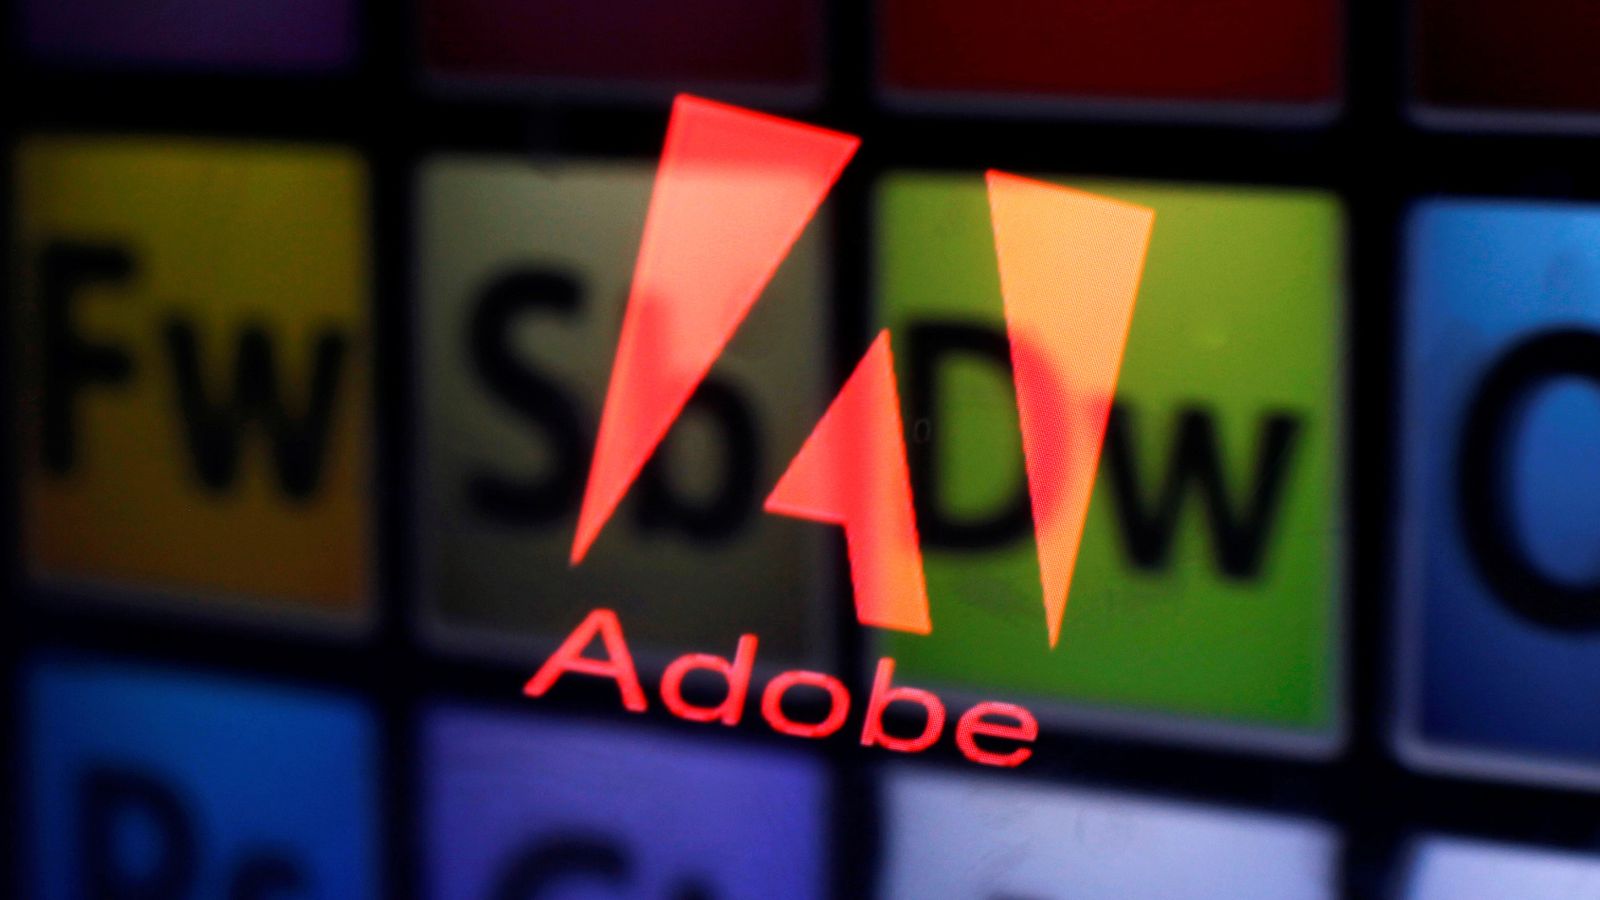 Adobe Flash Player officially discontinued after years of problems